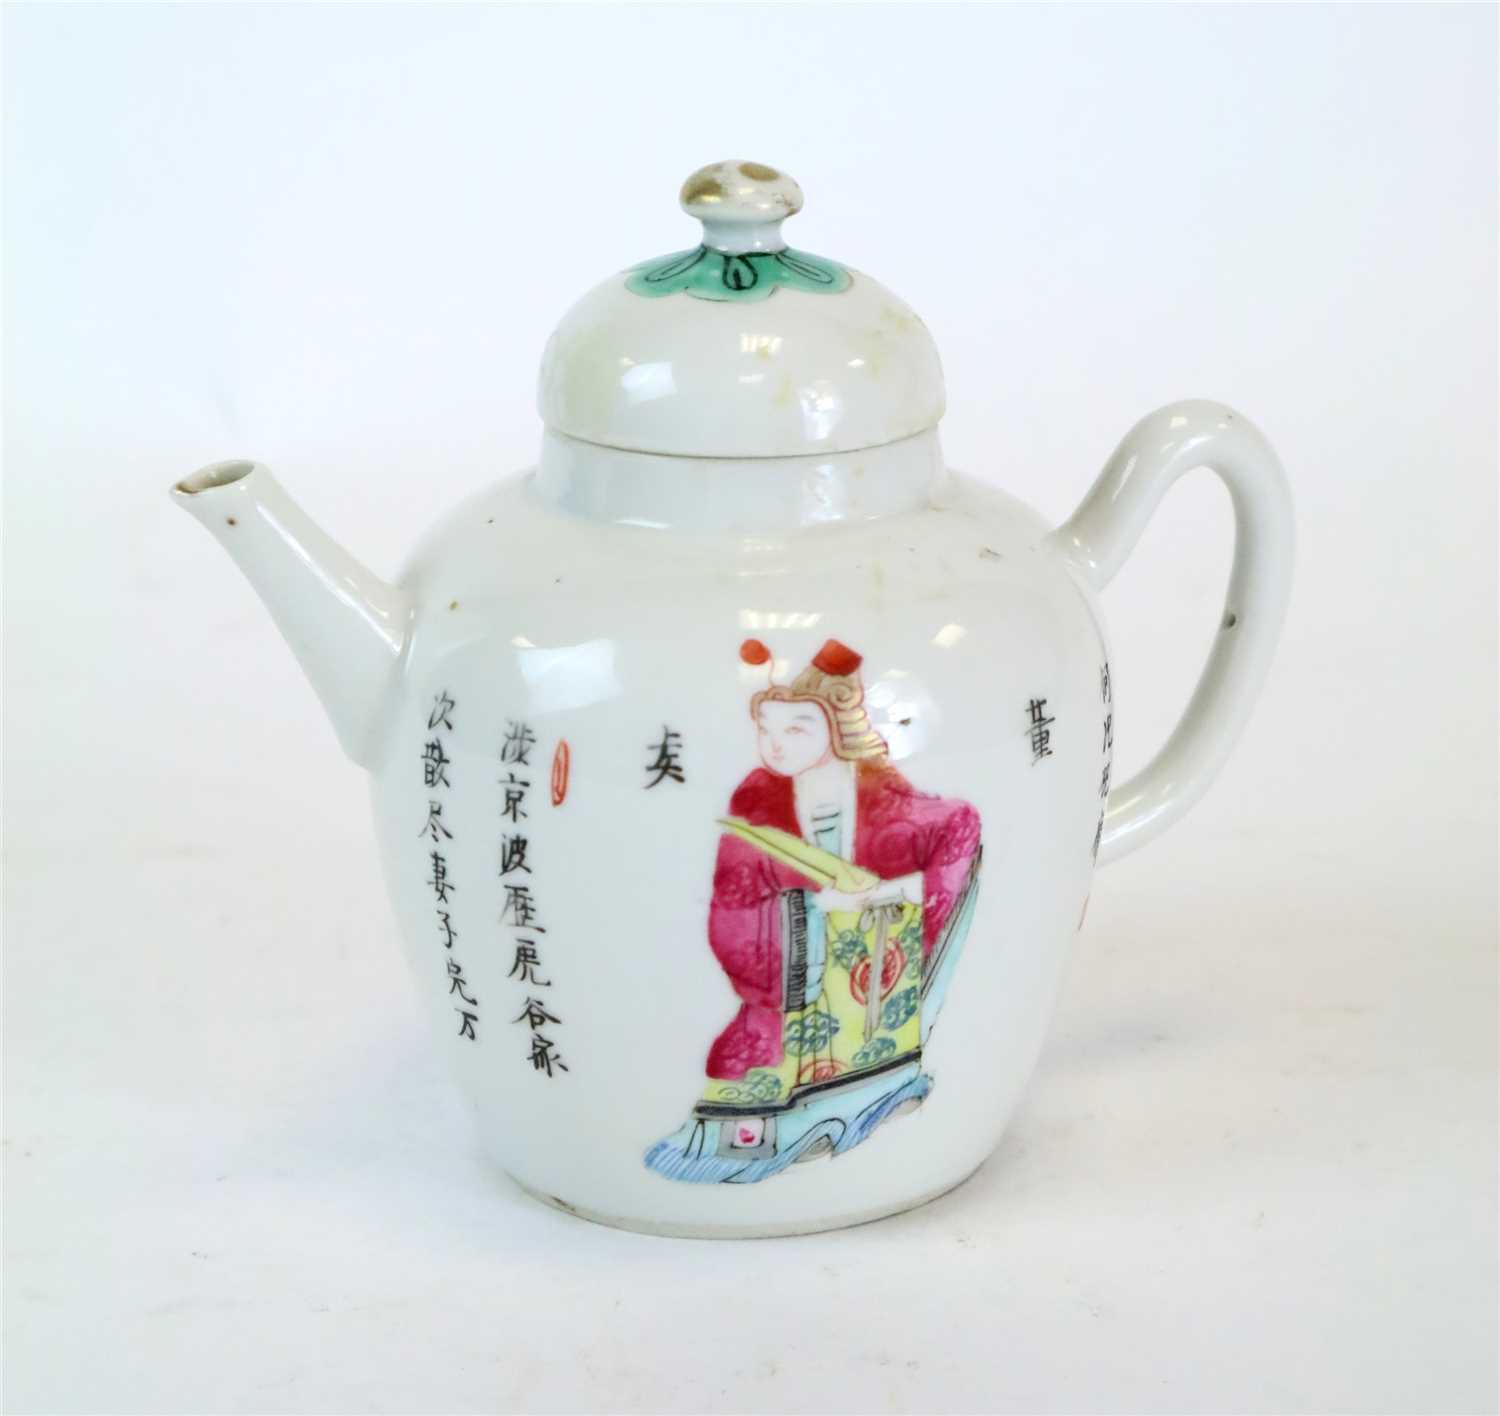 Lot 149 - A Qing period Chinese export porcelain teapot and cover